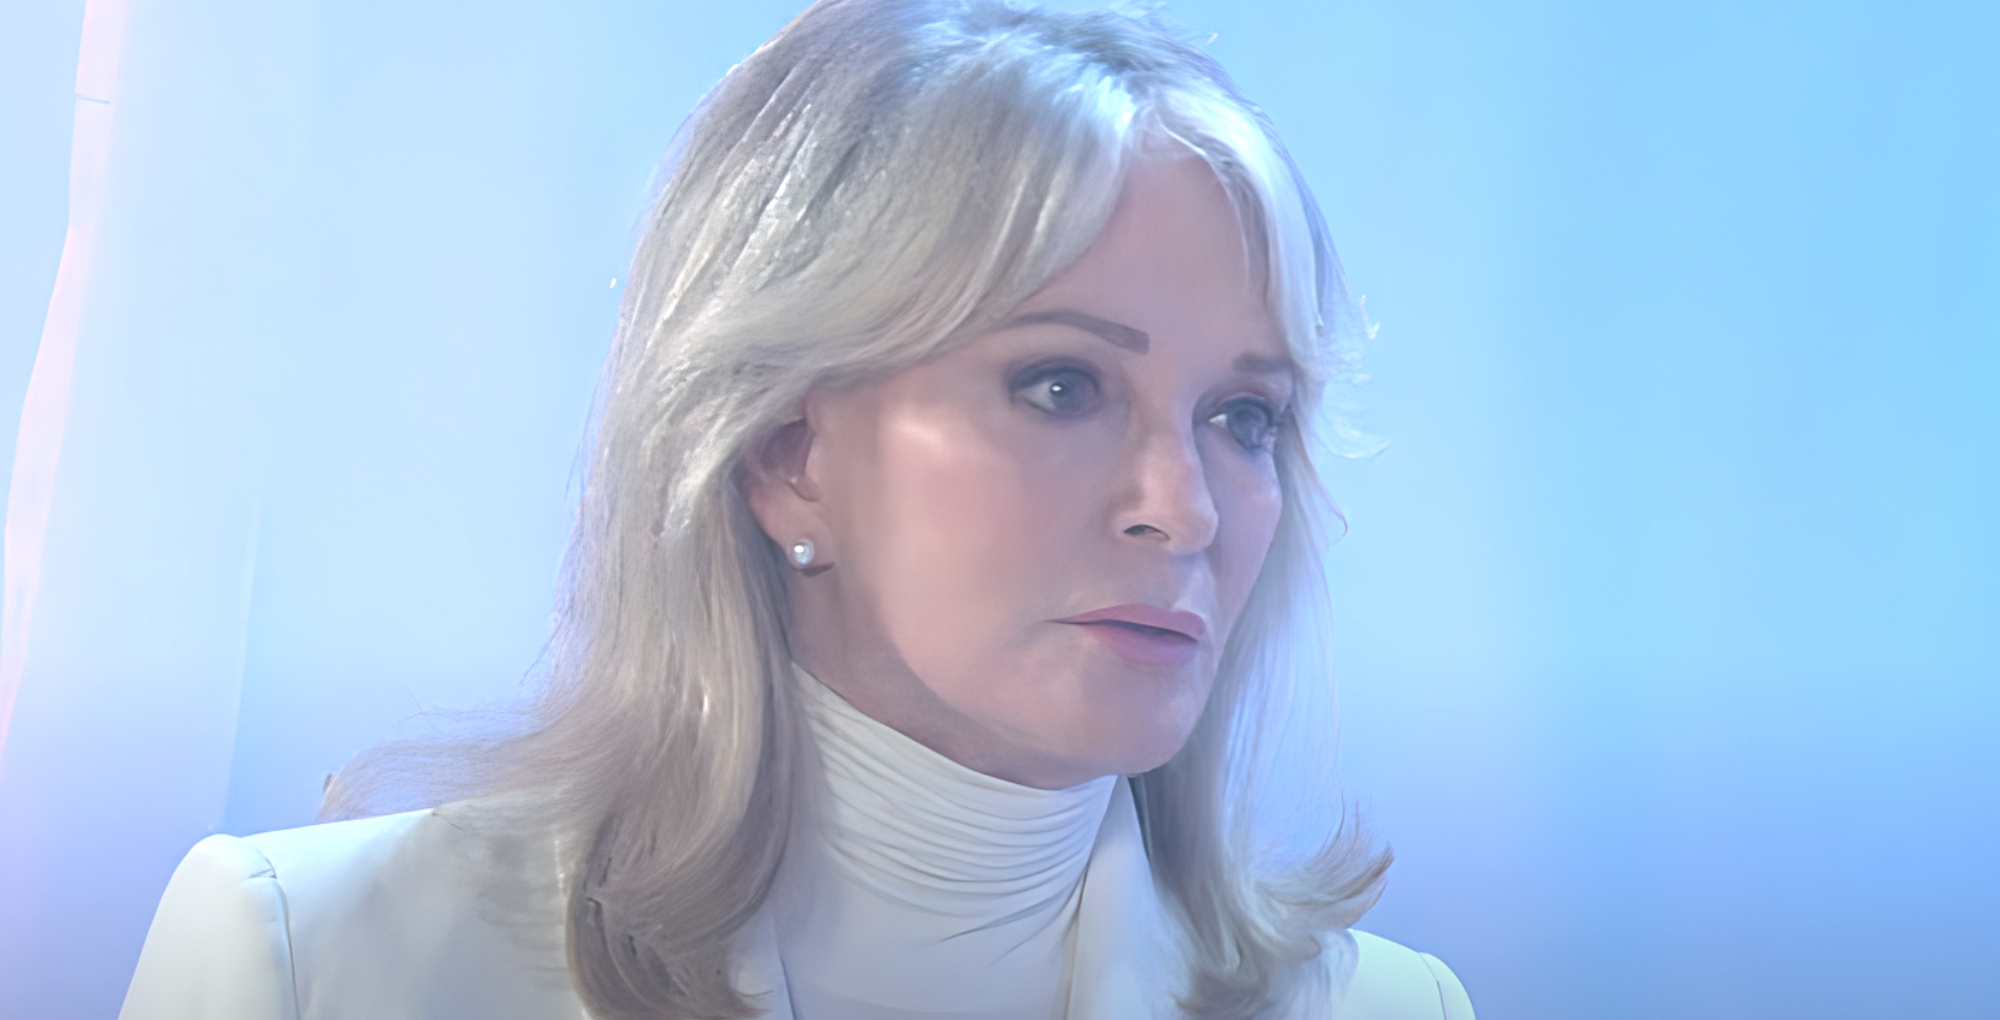 days of our lives spoilers for february 17, 2023 have heavenly marlena making a deal